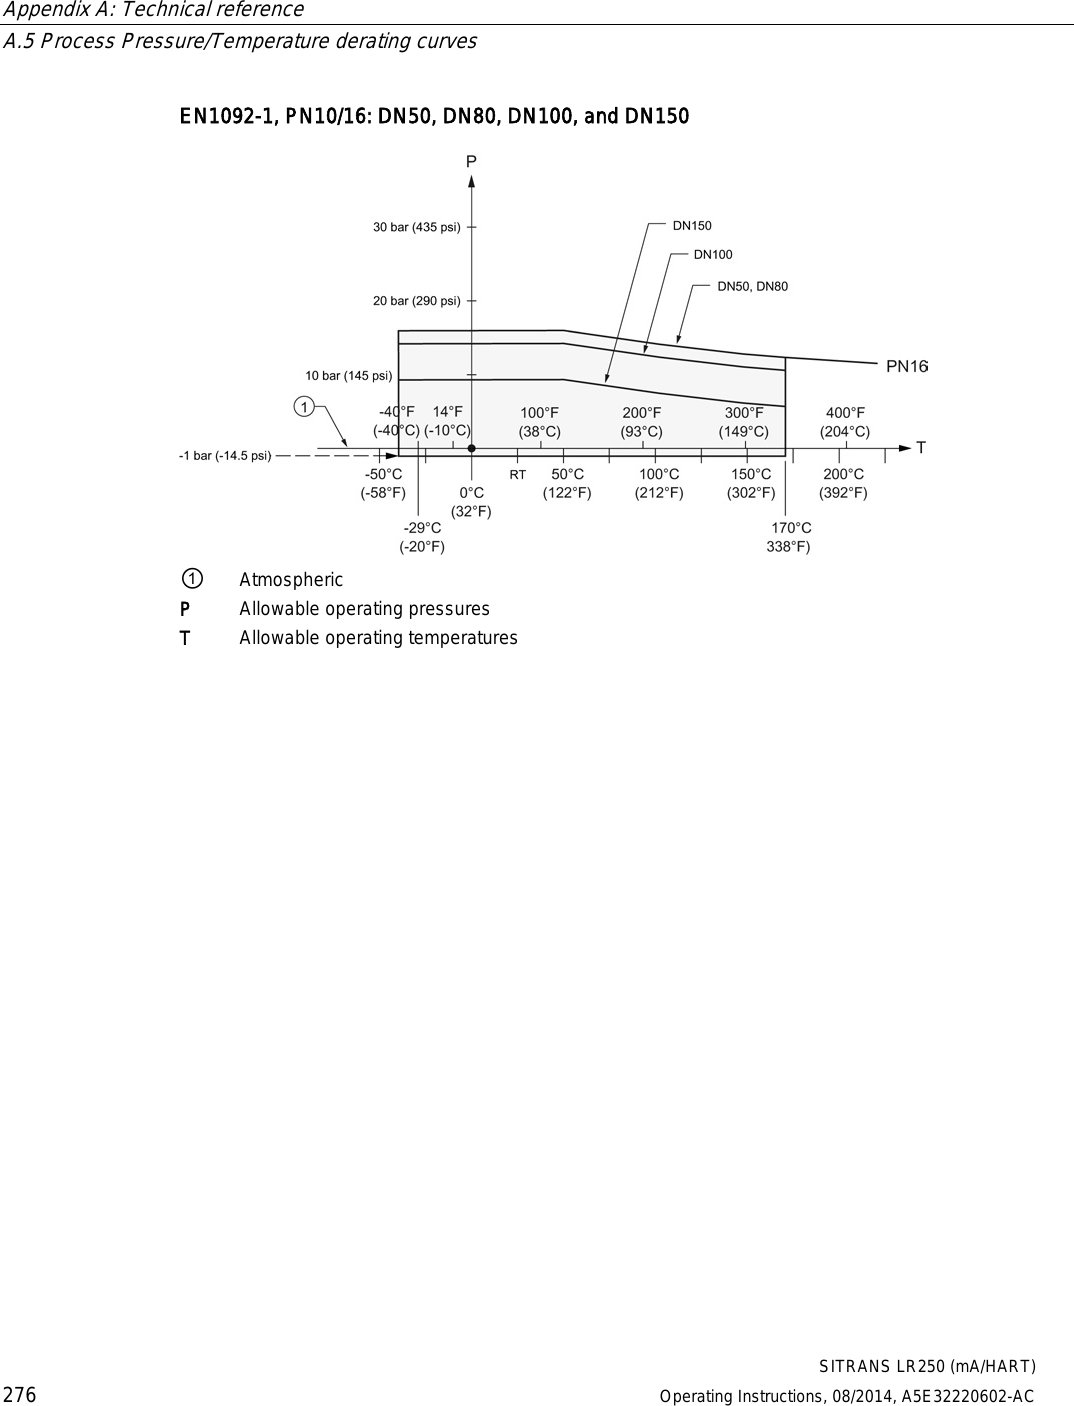 Appendix A: Technical reference   A.5 Process Pressure/Temperature derating curves  SITRANS LR250 (mA/HART) 276 Operating Instructions, 08/2014, A5E32220602-AC EN1092-1, PN10/16: DN50, DN80, DN100, and DN150  ① Atmospheric P Allowable operating pressures T Allowable operating temperatures 